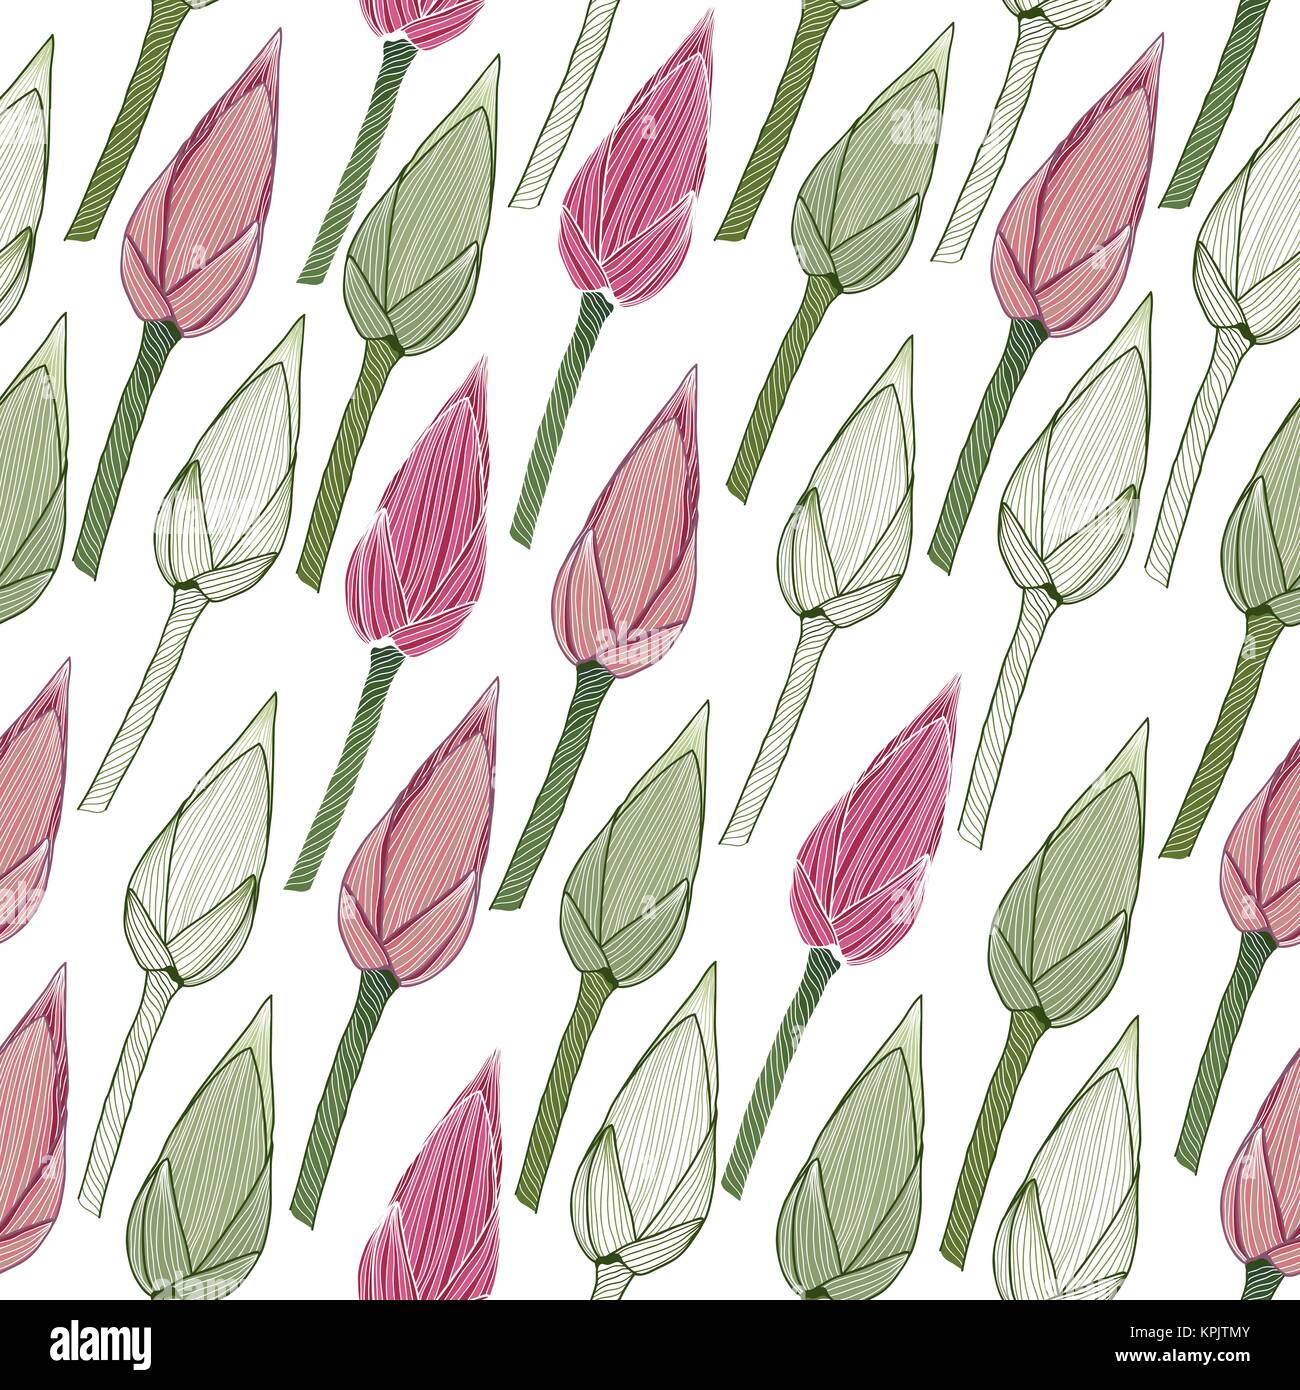 Simple floral pattern. Lotus buds in the spring season. Seamless background. Endless texture. Nature theme. Can be used for wallpaper, pattern fills,  Stock Vector